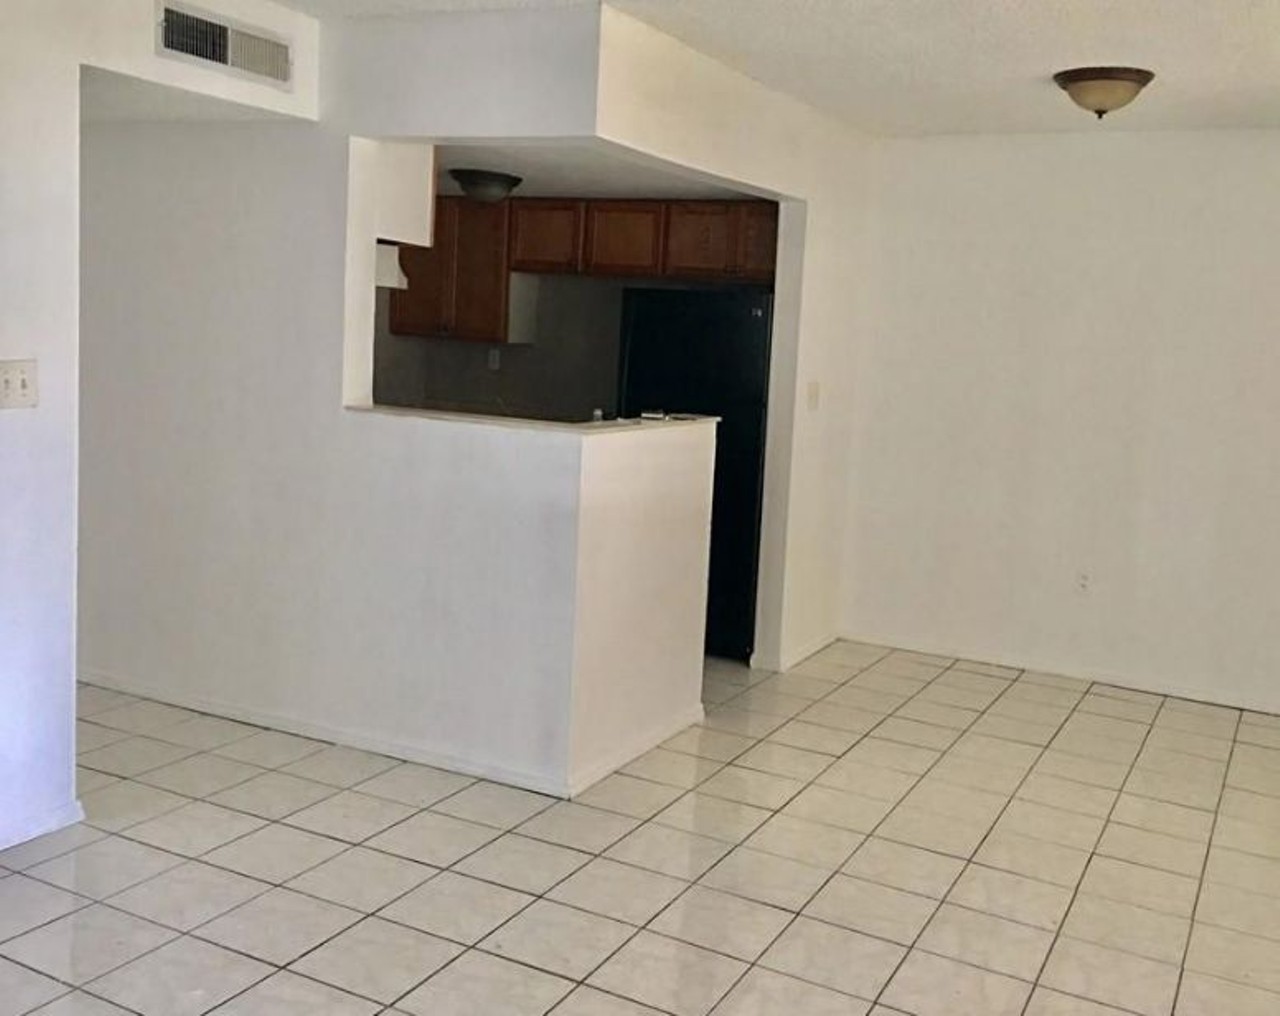 7123 Yacht Basin Ave, Orlando
$1,000/mo
2 bed, 2 bath, 1970 sqft
The kitchen is tucked away, which really allows to utilize the rest of the space for a living room.